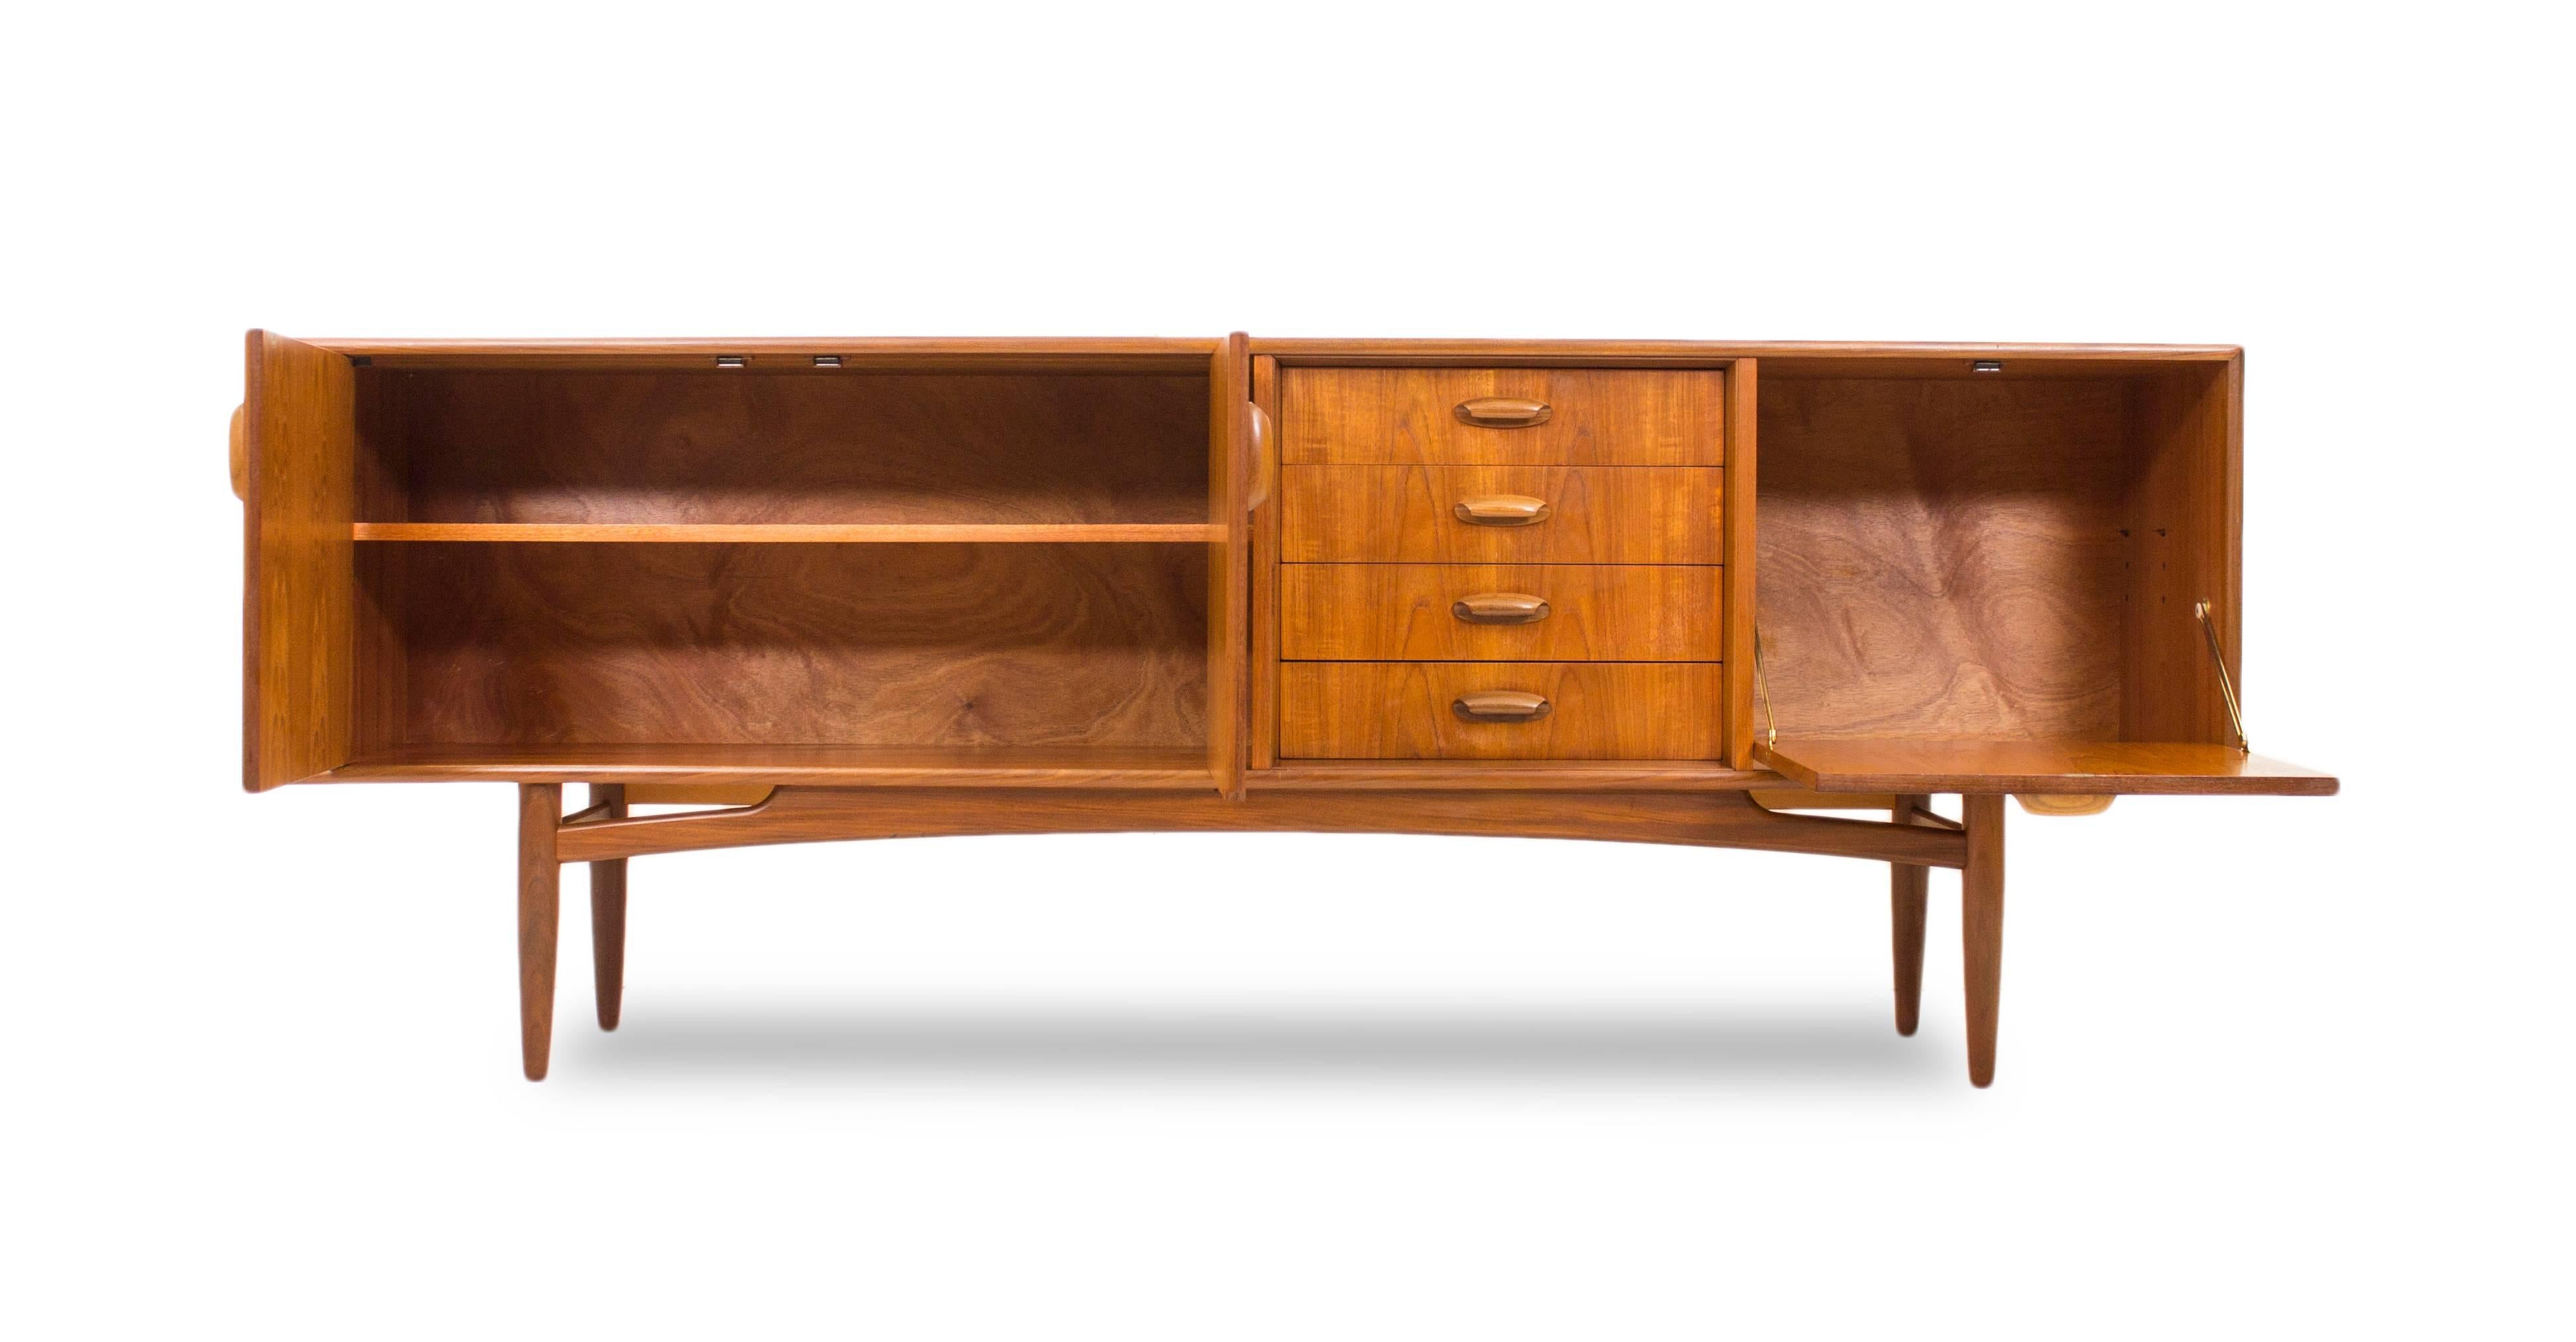 In 1964 G Plan upped their game and introduced their own range of Danish inspired designs with a unique and beautifully Scandinavian influence that was to take the world by storm!

This stunning sideboard was produced in a variety of models all